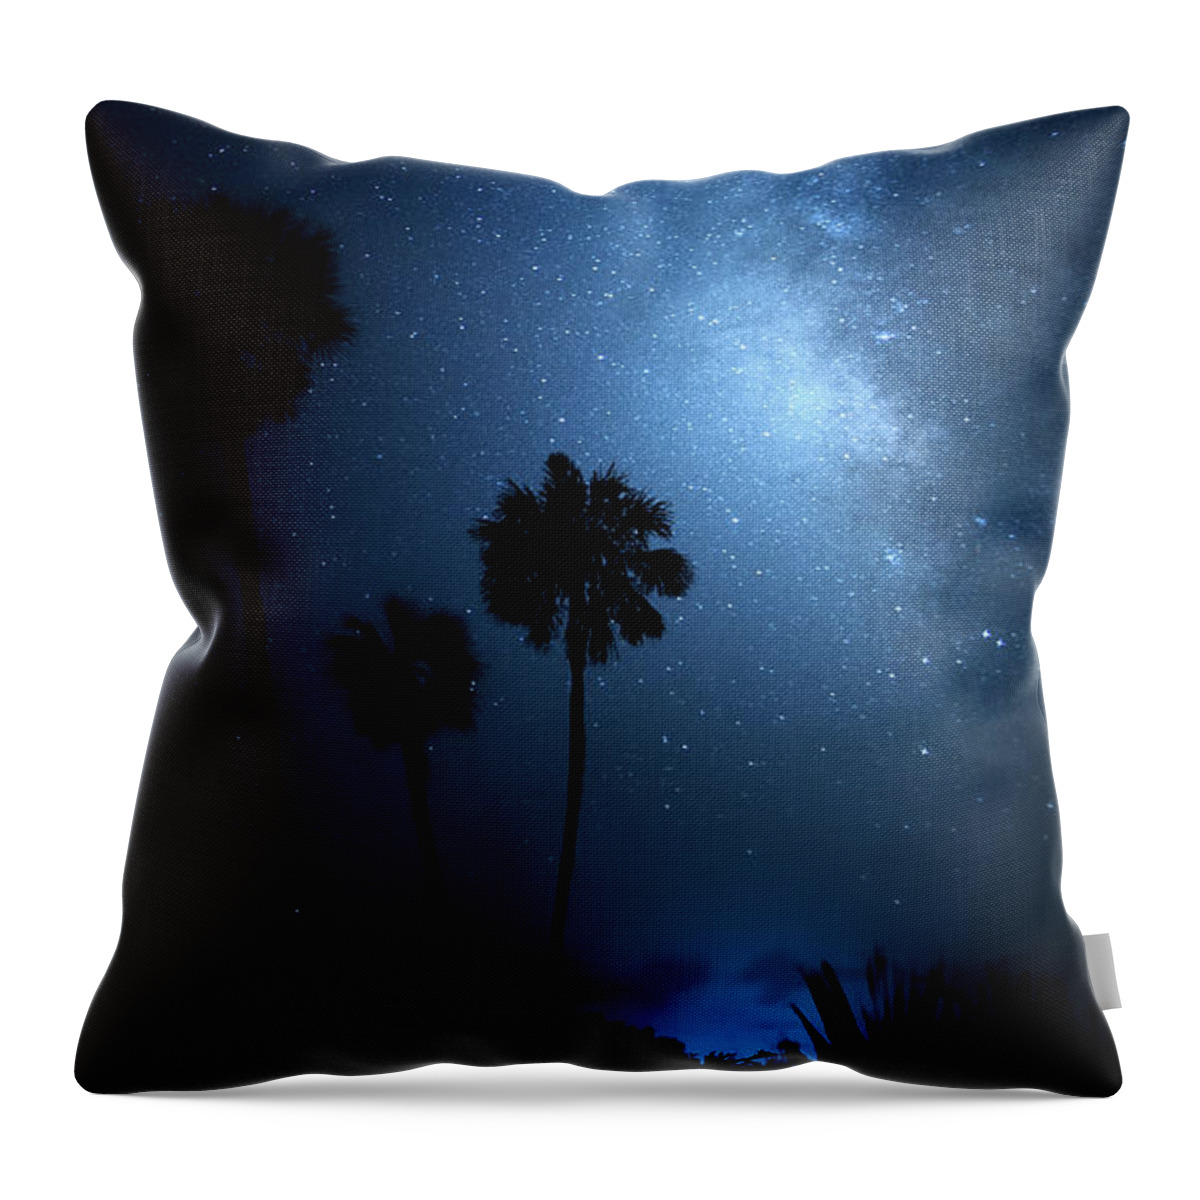 Milky Way Throw Pillow featuring the photograph Hidden Worlds by Mark Andrew Thomas